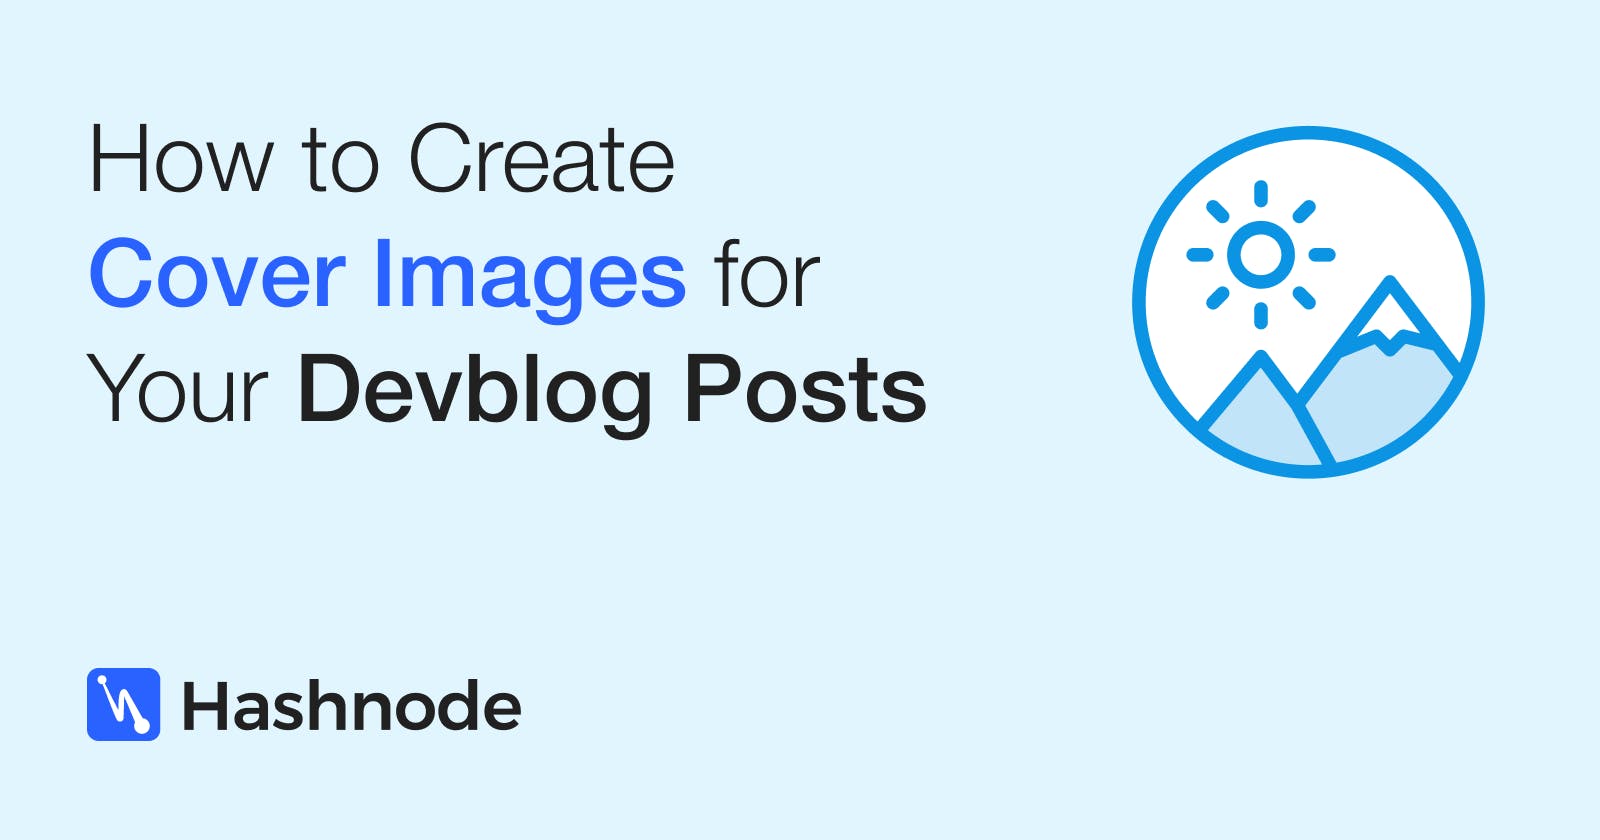 How to Create Cover Images for Your Devblog Posts